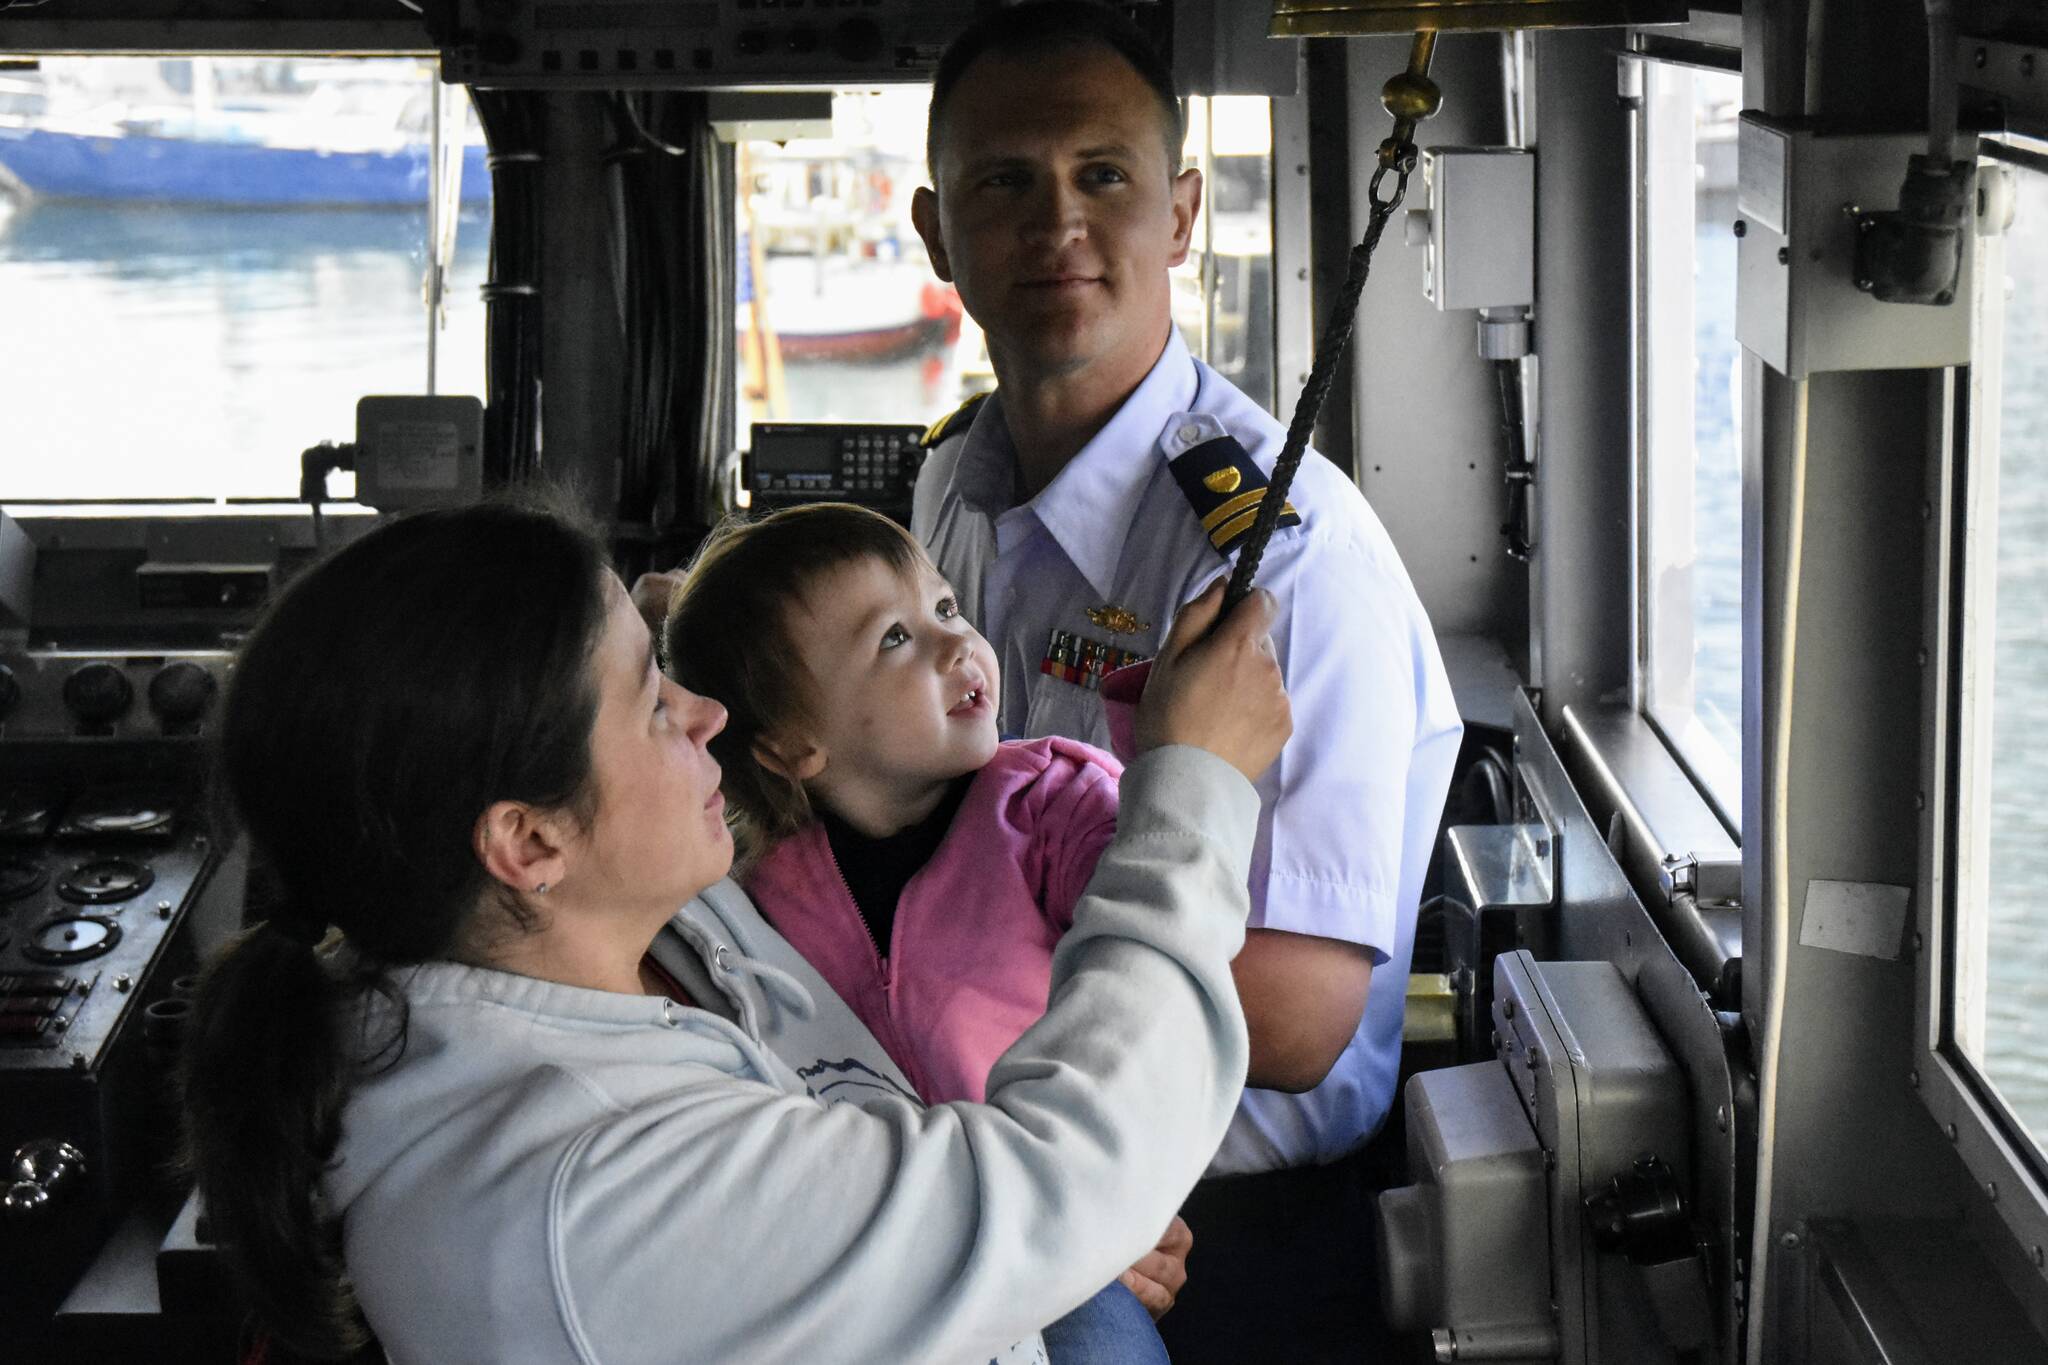 Lt. George Greendyk, commanding officer of the U.S. Coast Guard Liberty, watches as a mother and child ring the bell on the ships bridge on Thursday, May 26, 2022. The Liberty is being re-homeported in Valdez and as a send-off, the ship was open to the public for tours. (Peter Segall / Juneau Empire)